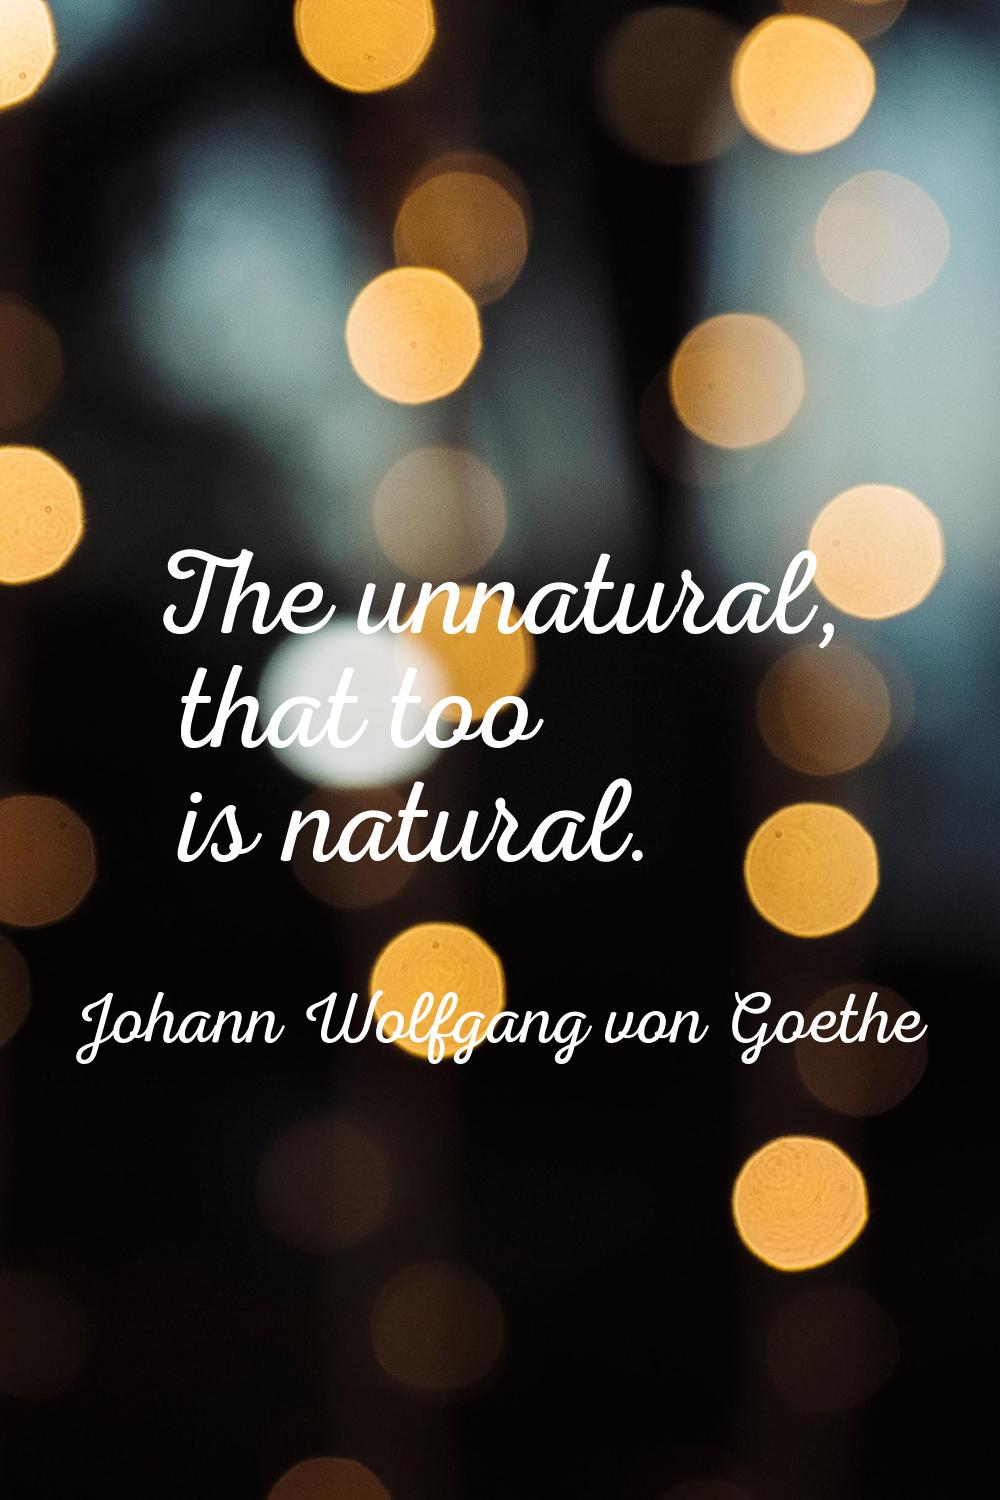 The unnatural, that too is natural.